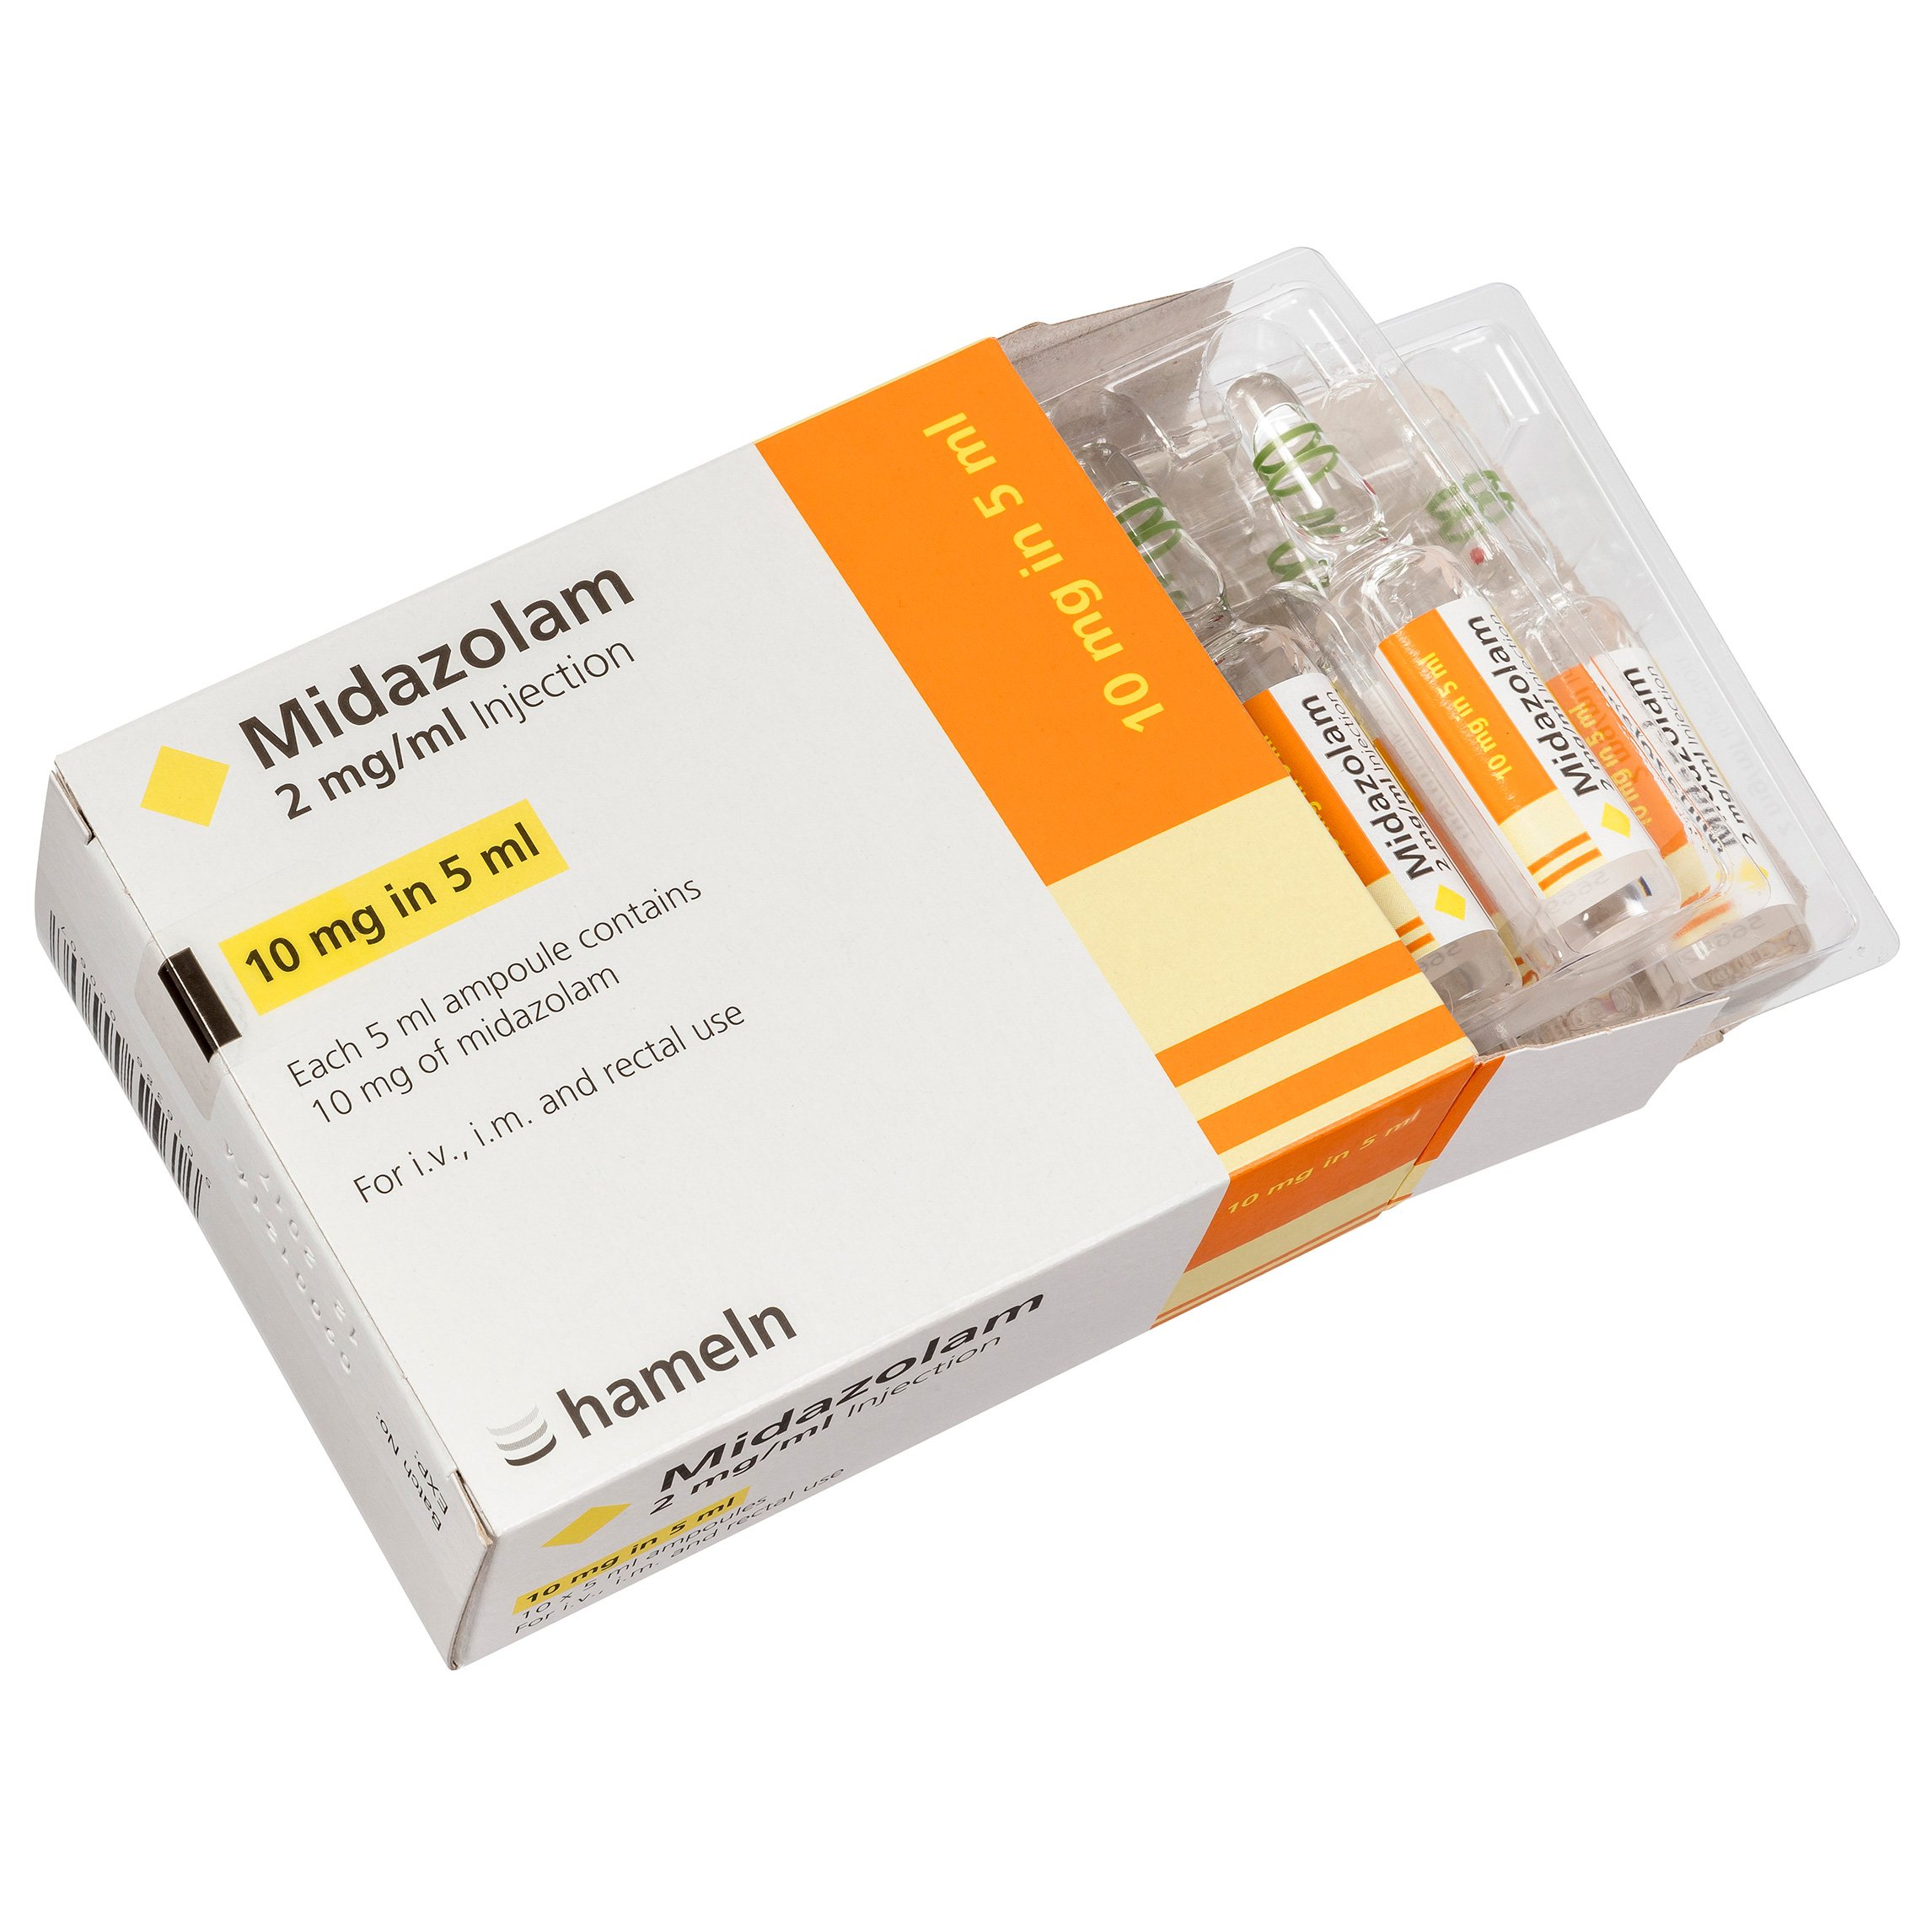 Midazolam 10mg/5ml Ampoules (2mg/ml solution) 